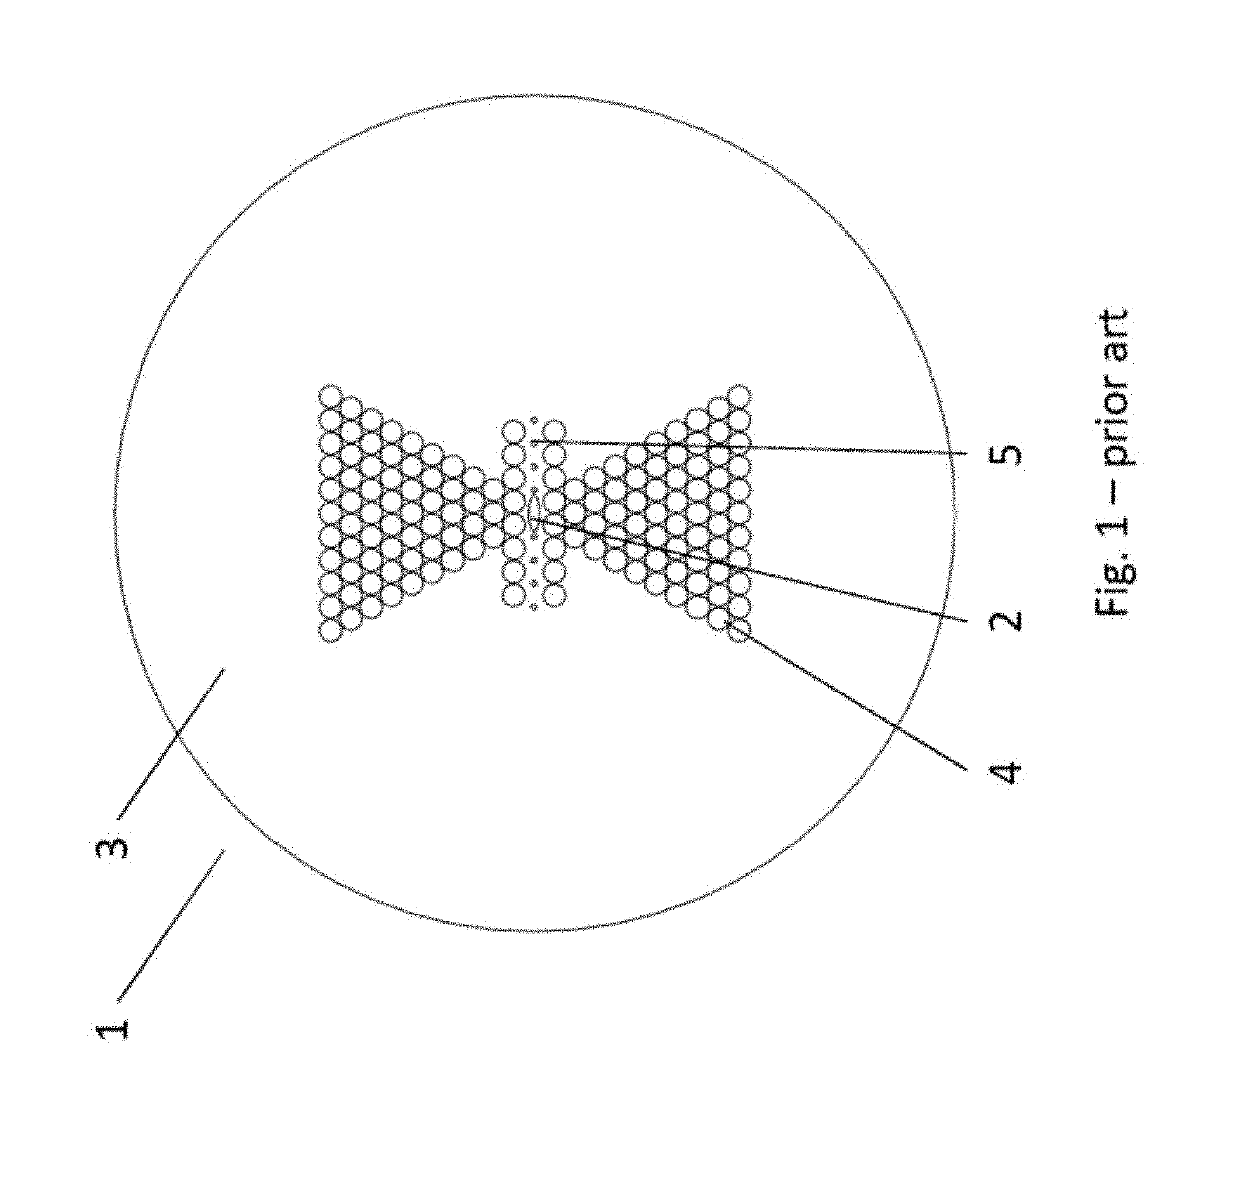 Microstructured optical fibre, composite structure, method and use for measuring shear load in a composite structure